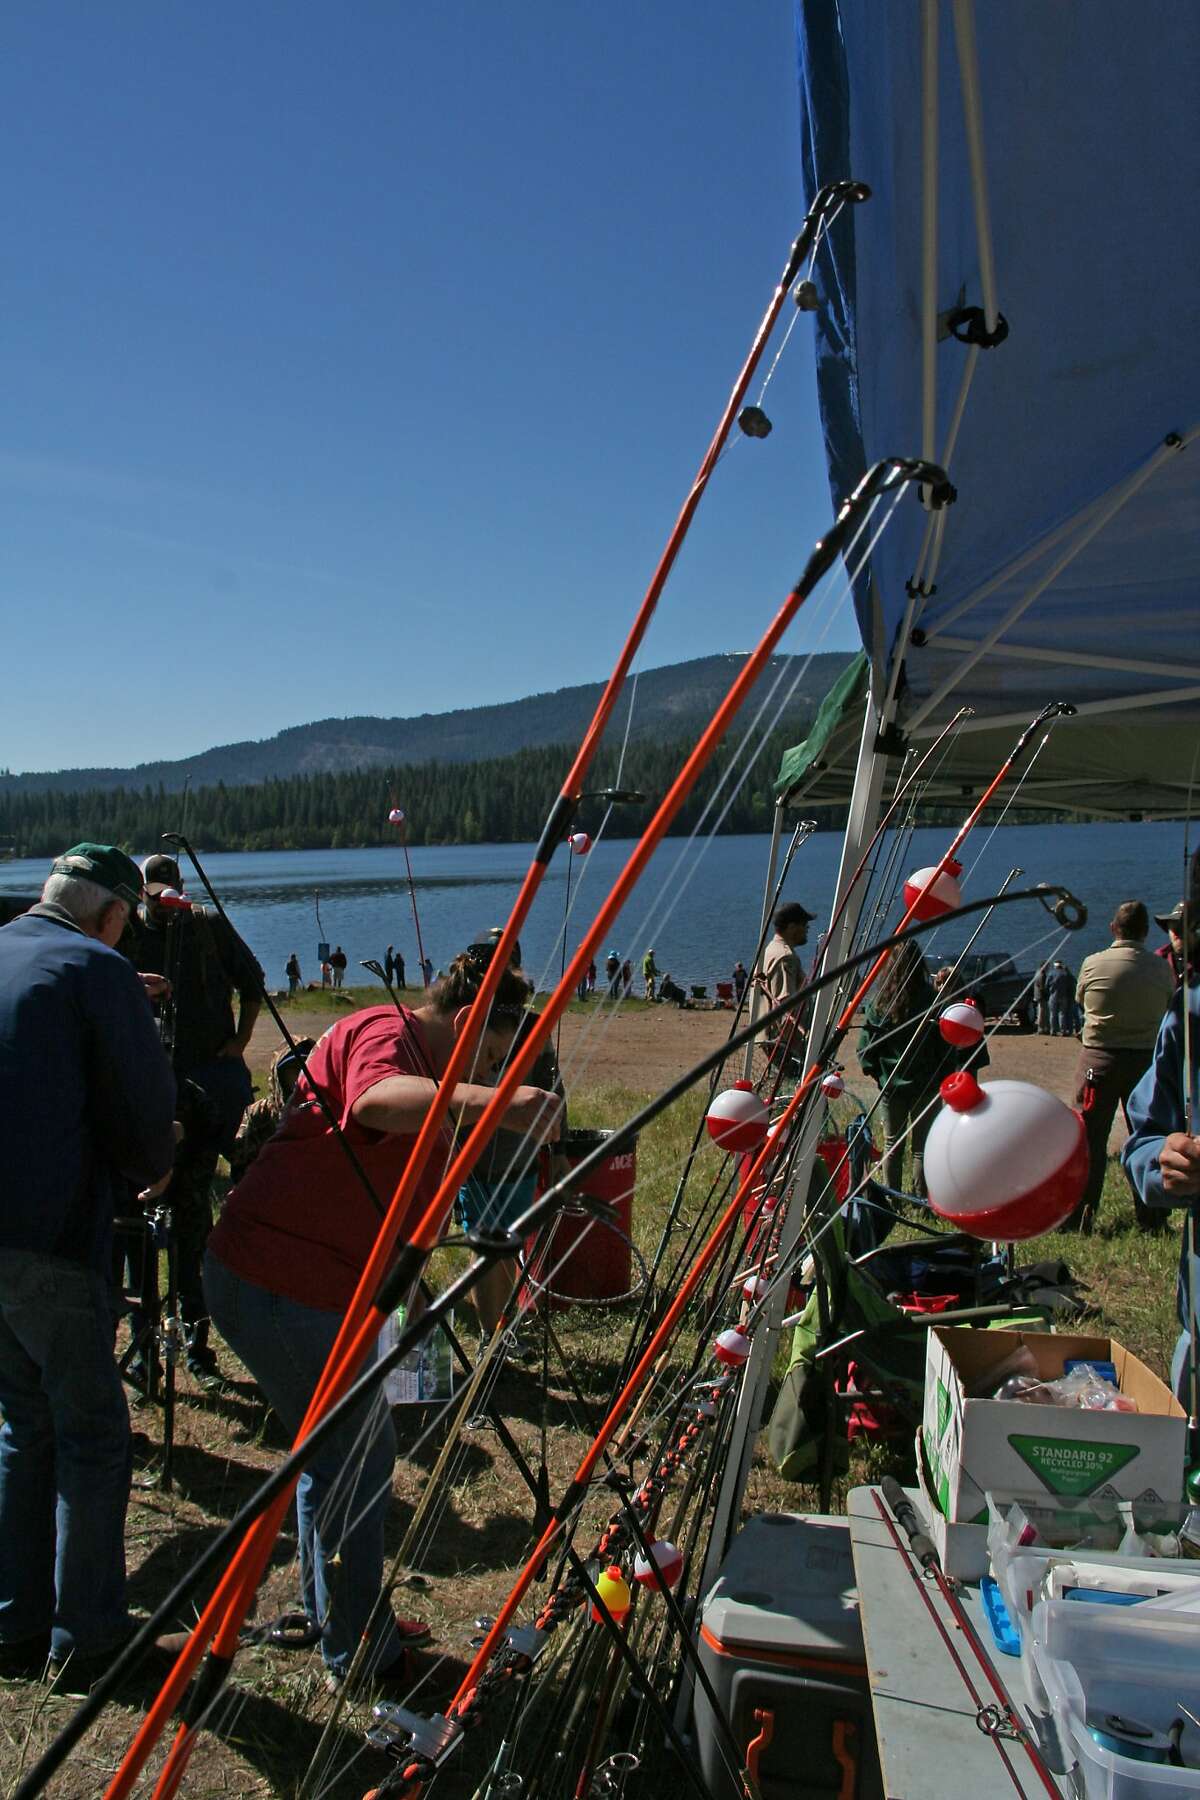 The Department of Fish and Wildlife provided free loaner rods and bait to youngsters for Kid's Fishing Day at Lake Siskiyou